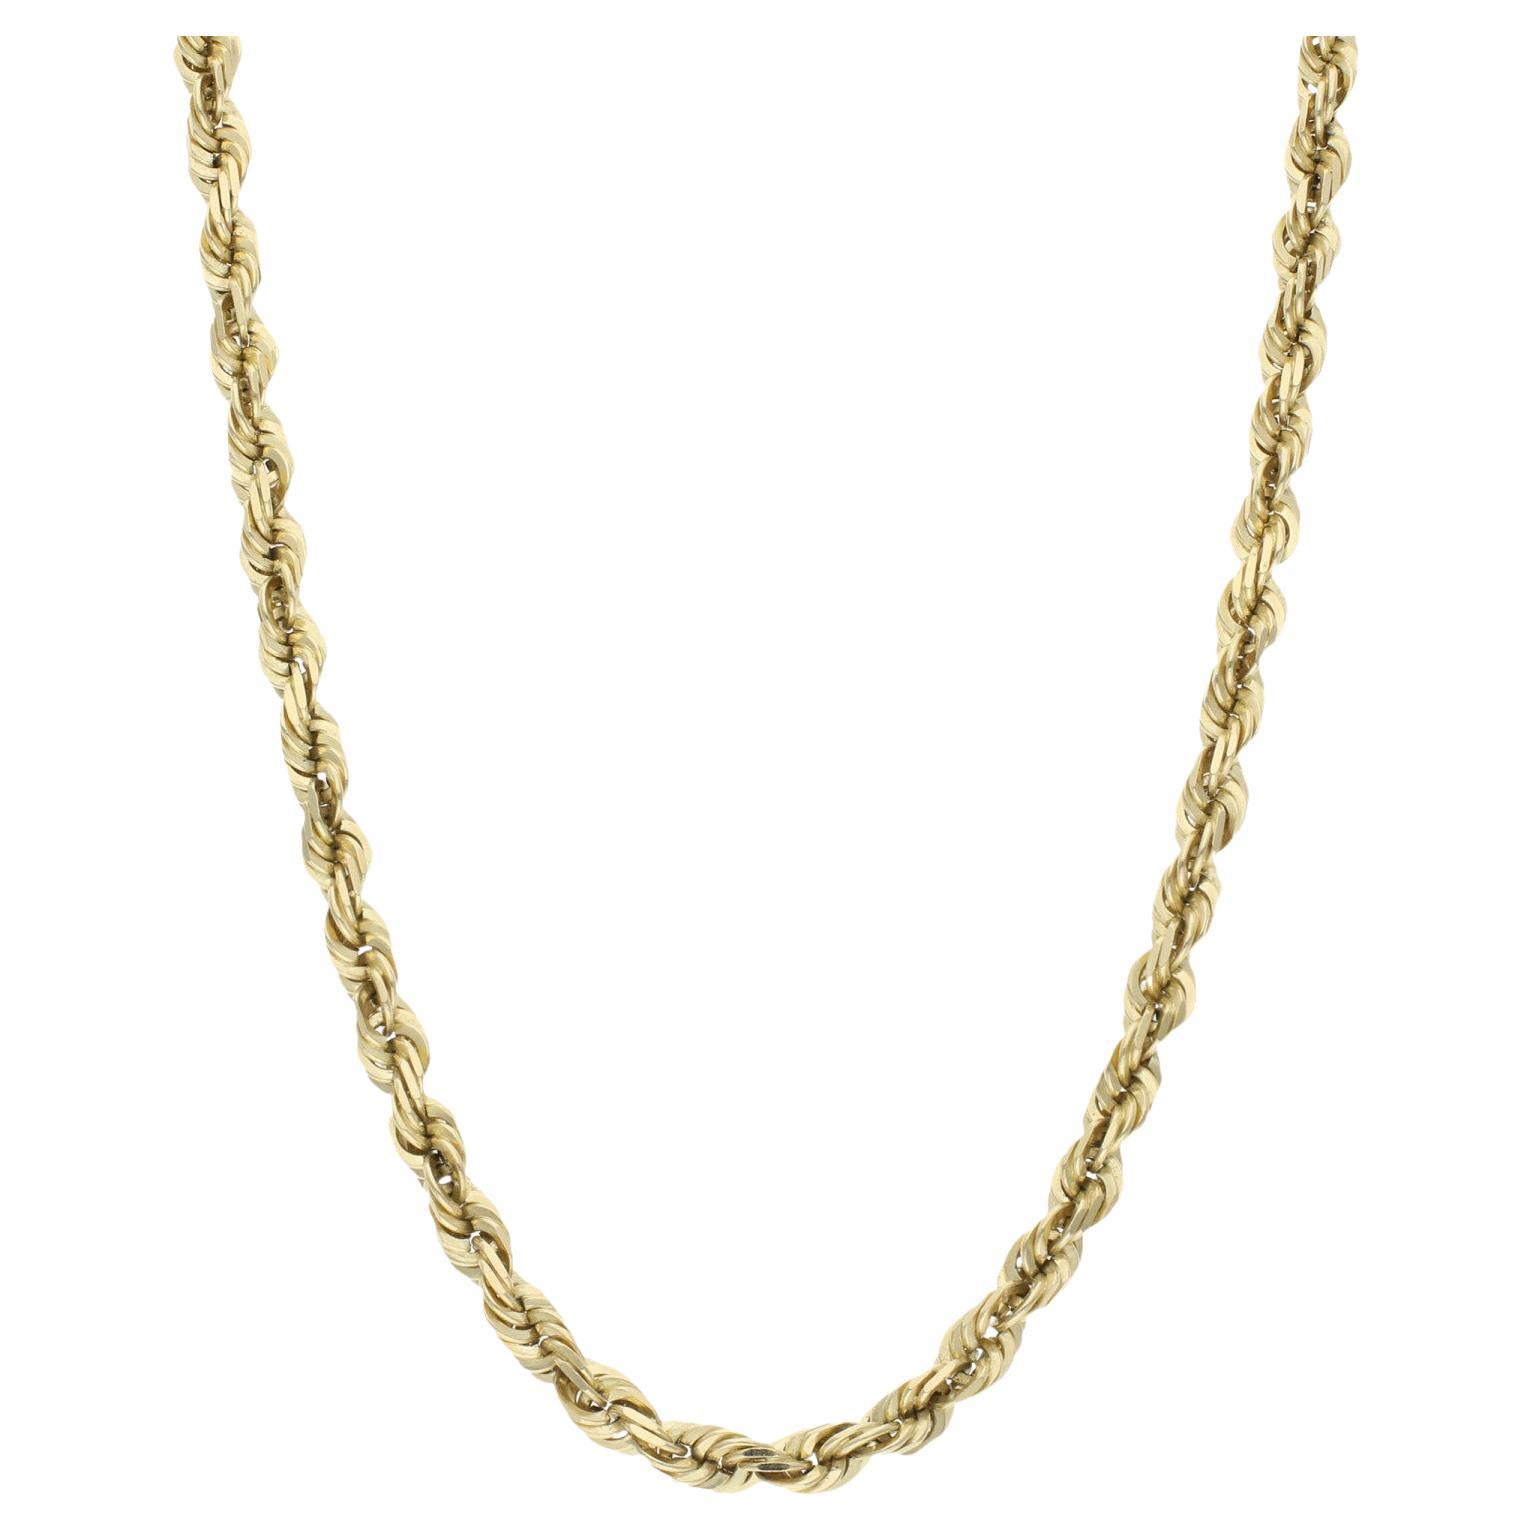 Solid 14ct Yellow Gold 26Inch Rope Chain 59.60g